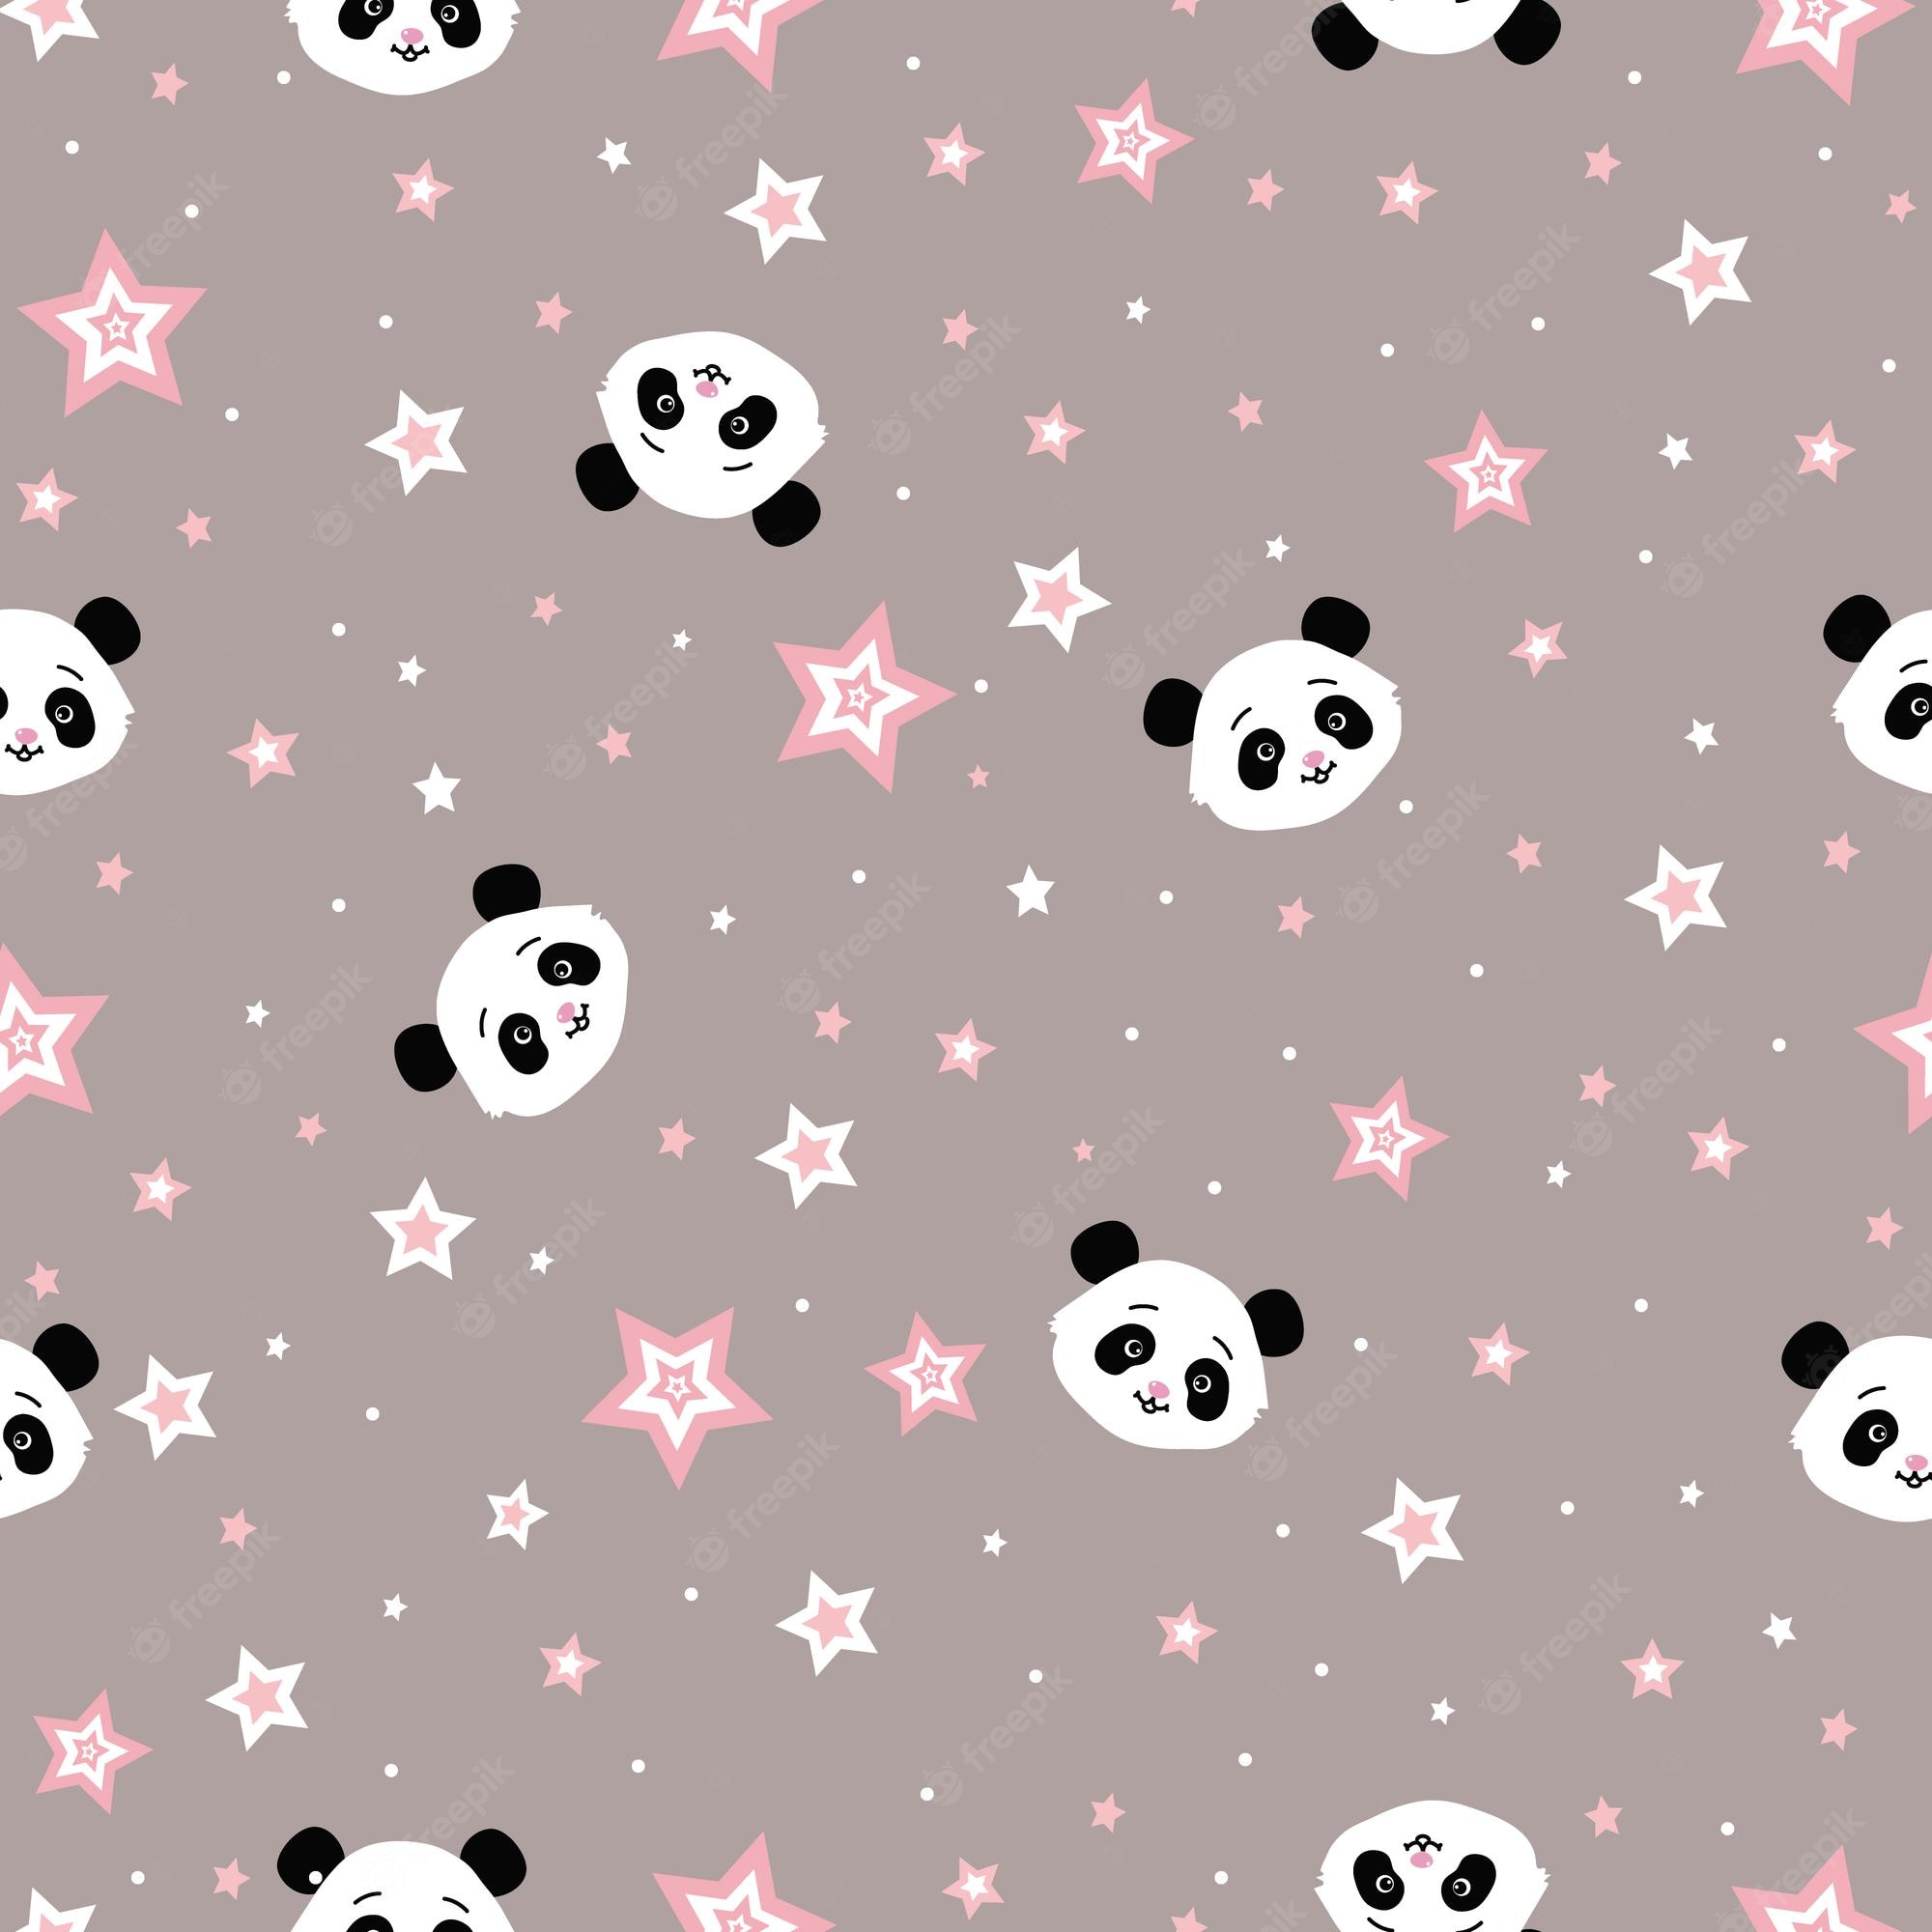 Premium Vector. Seamless pattern with cute cartoon panda and pink starsdesign for childrens wallpaper